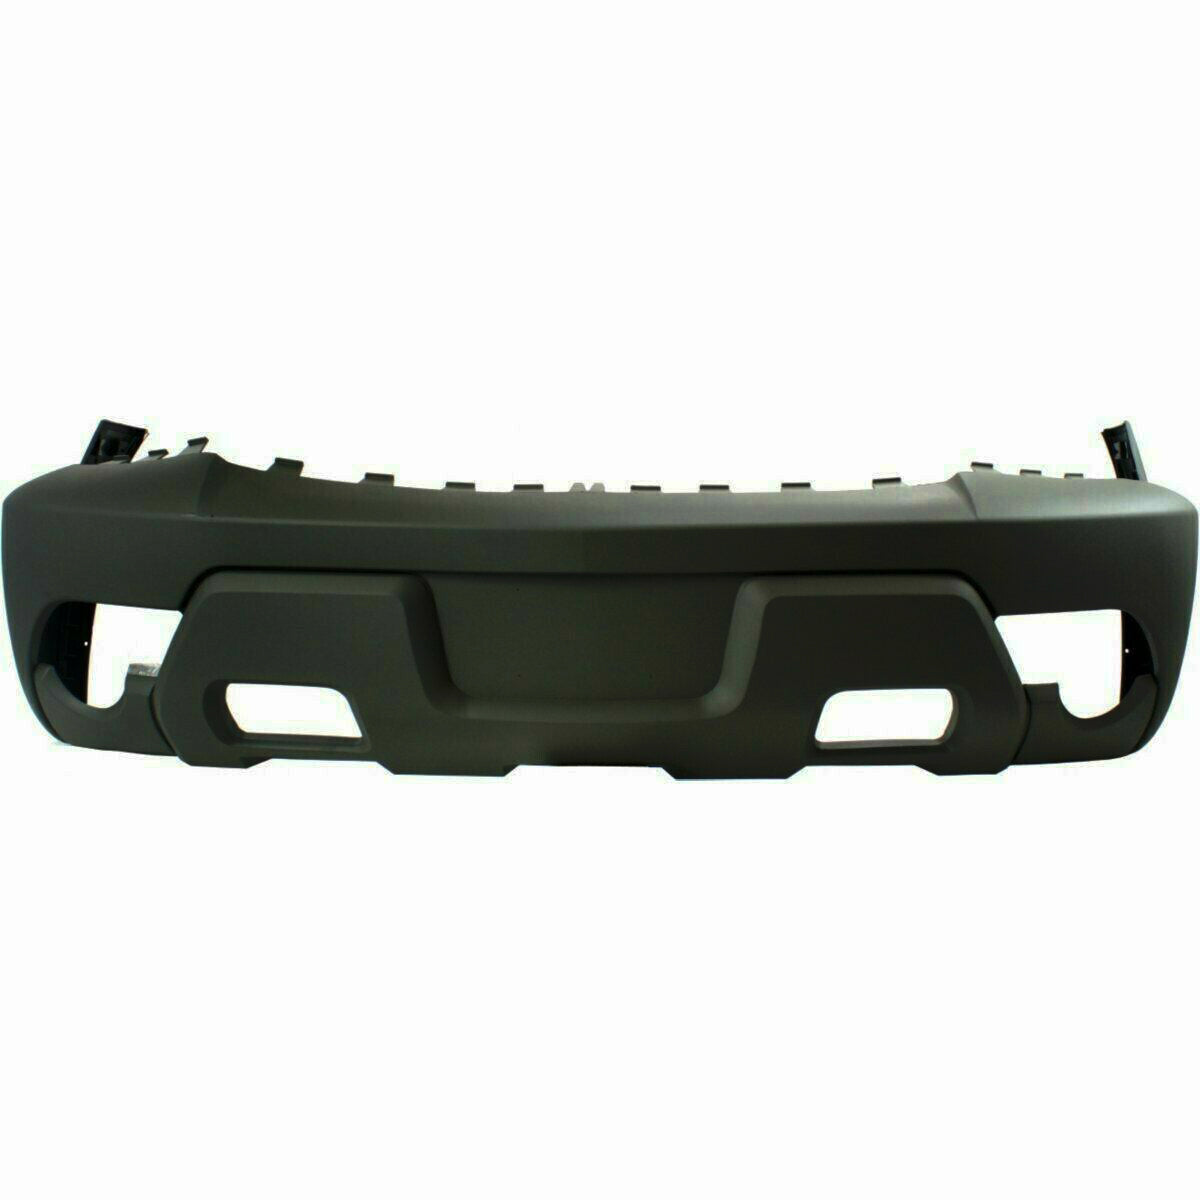 2002 Chevy Avalanche Front Bumper